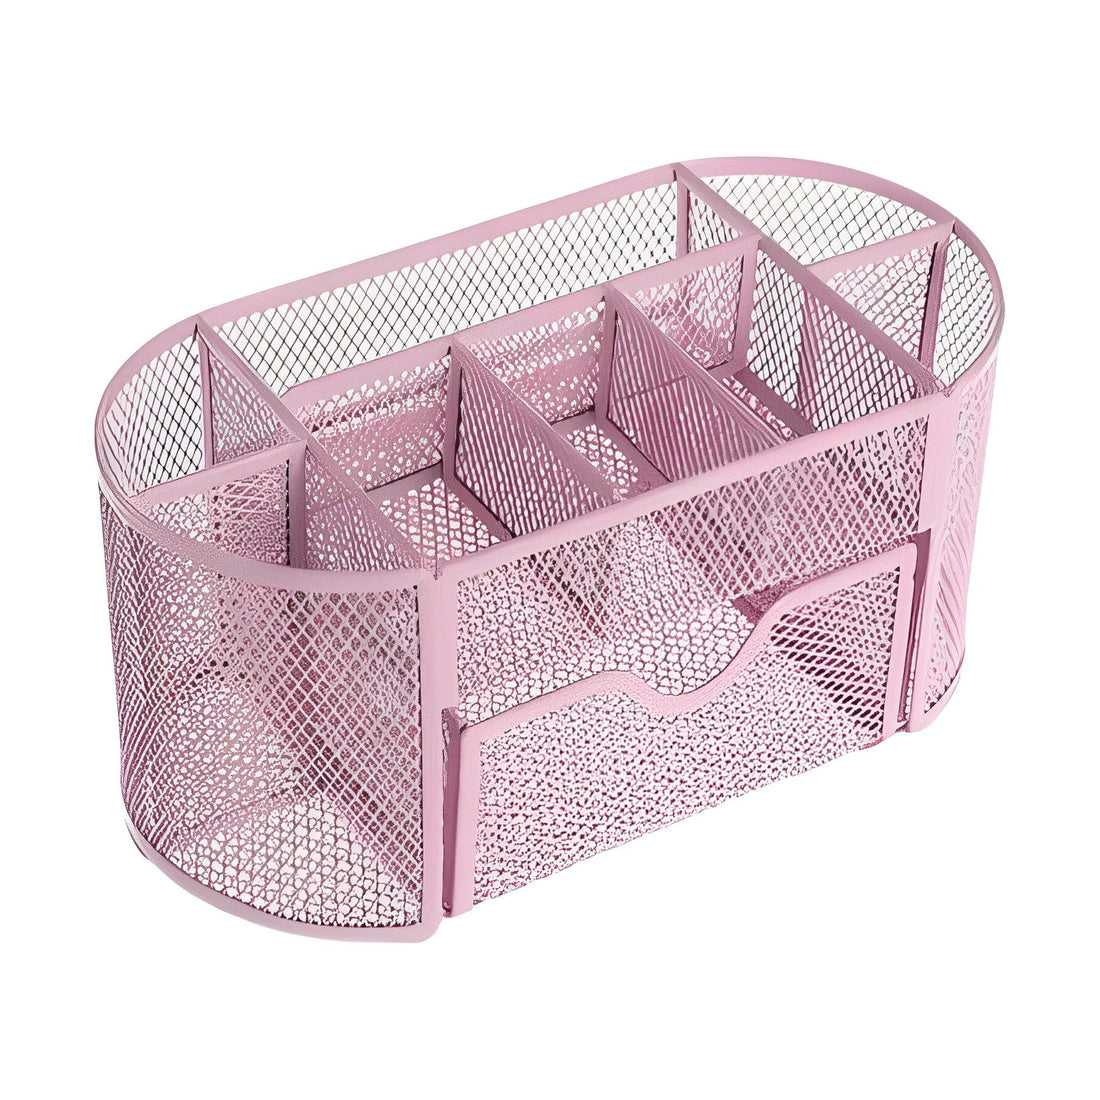 AnyCraft Pink Metal Mesh Stationery Storage Organizer with Large Capacity Compartments for Office and School Supplies-Organizers-PEROZ Accessories